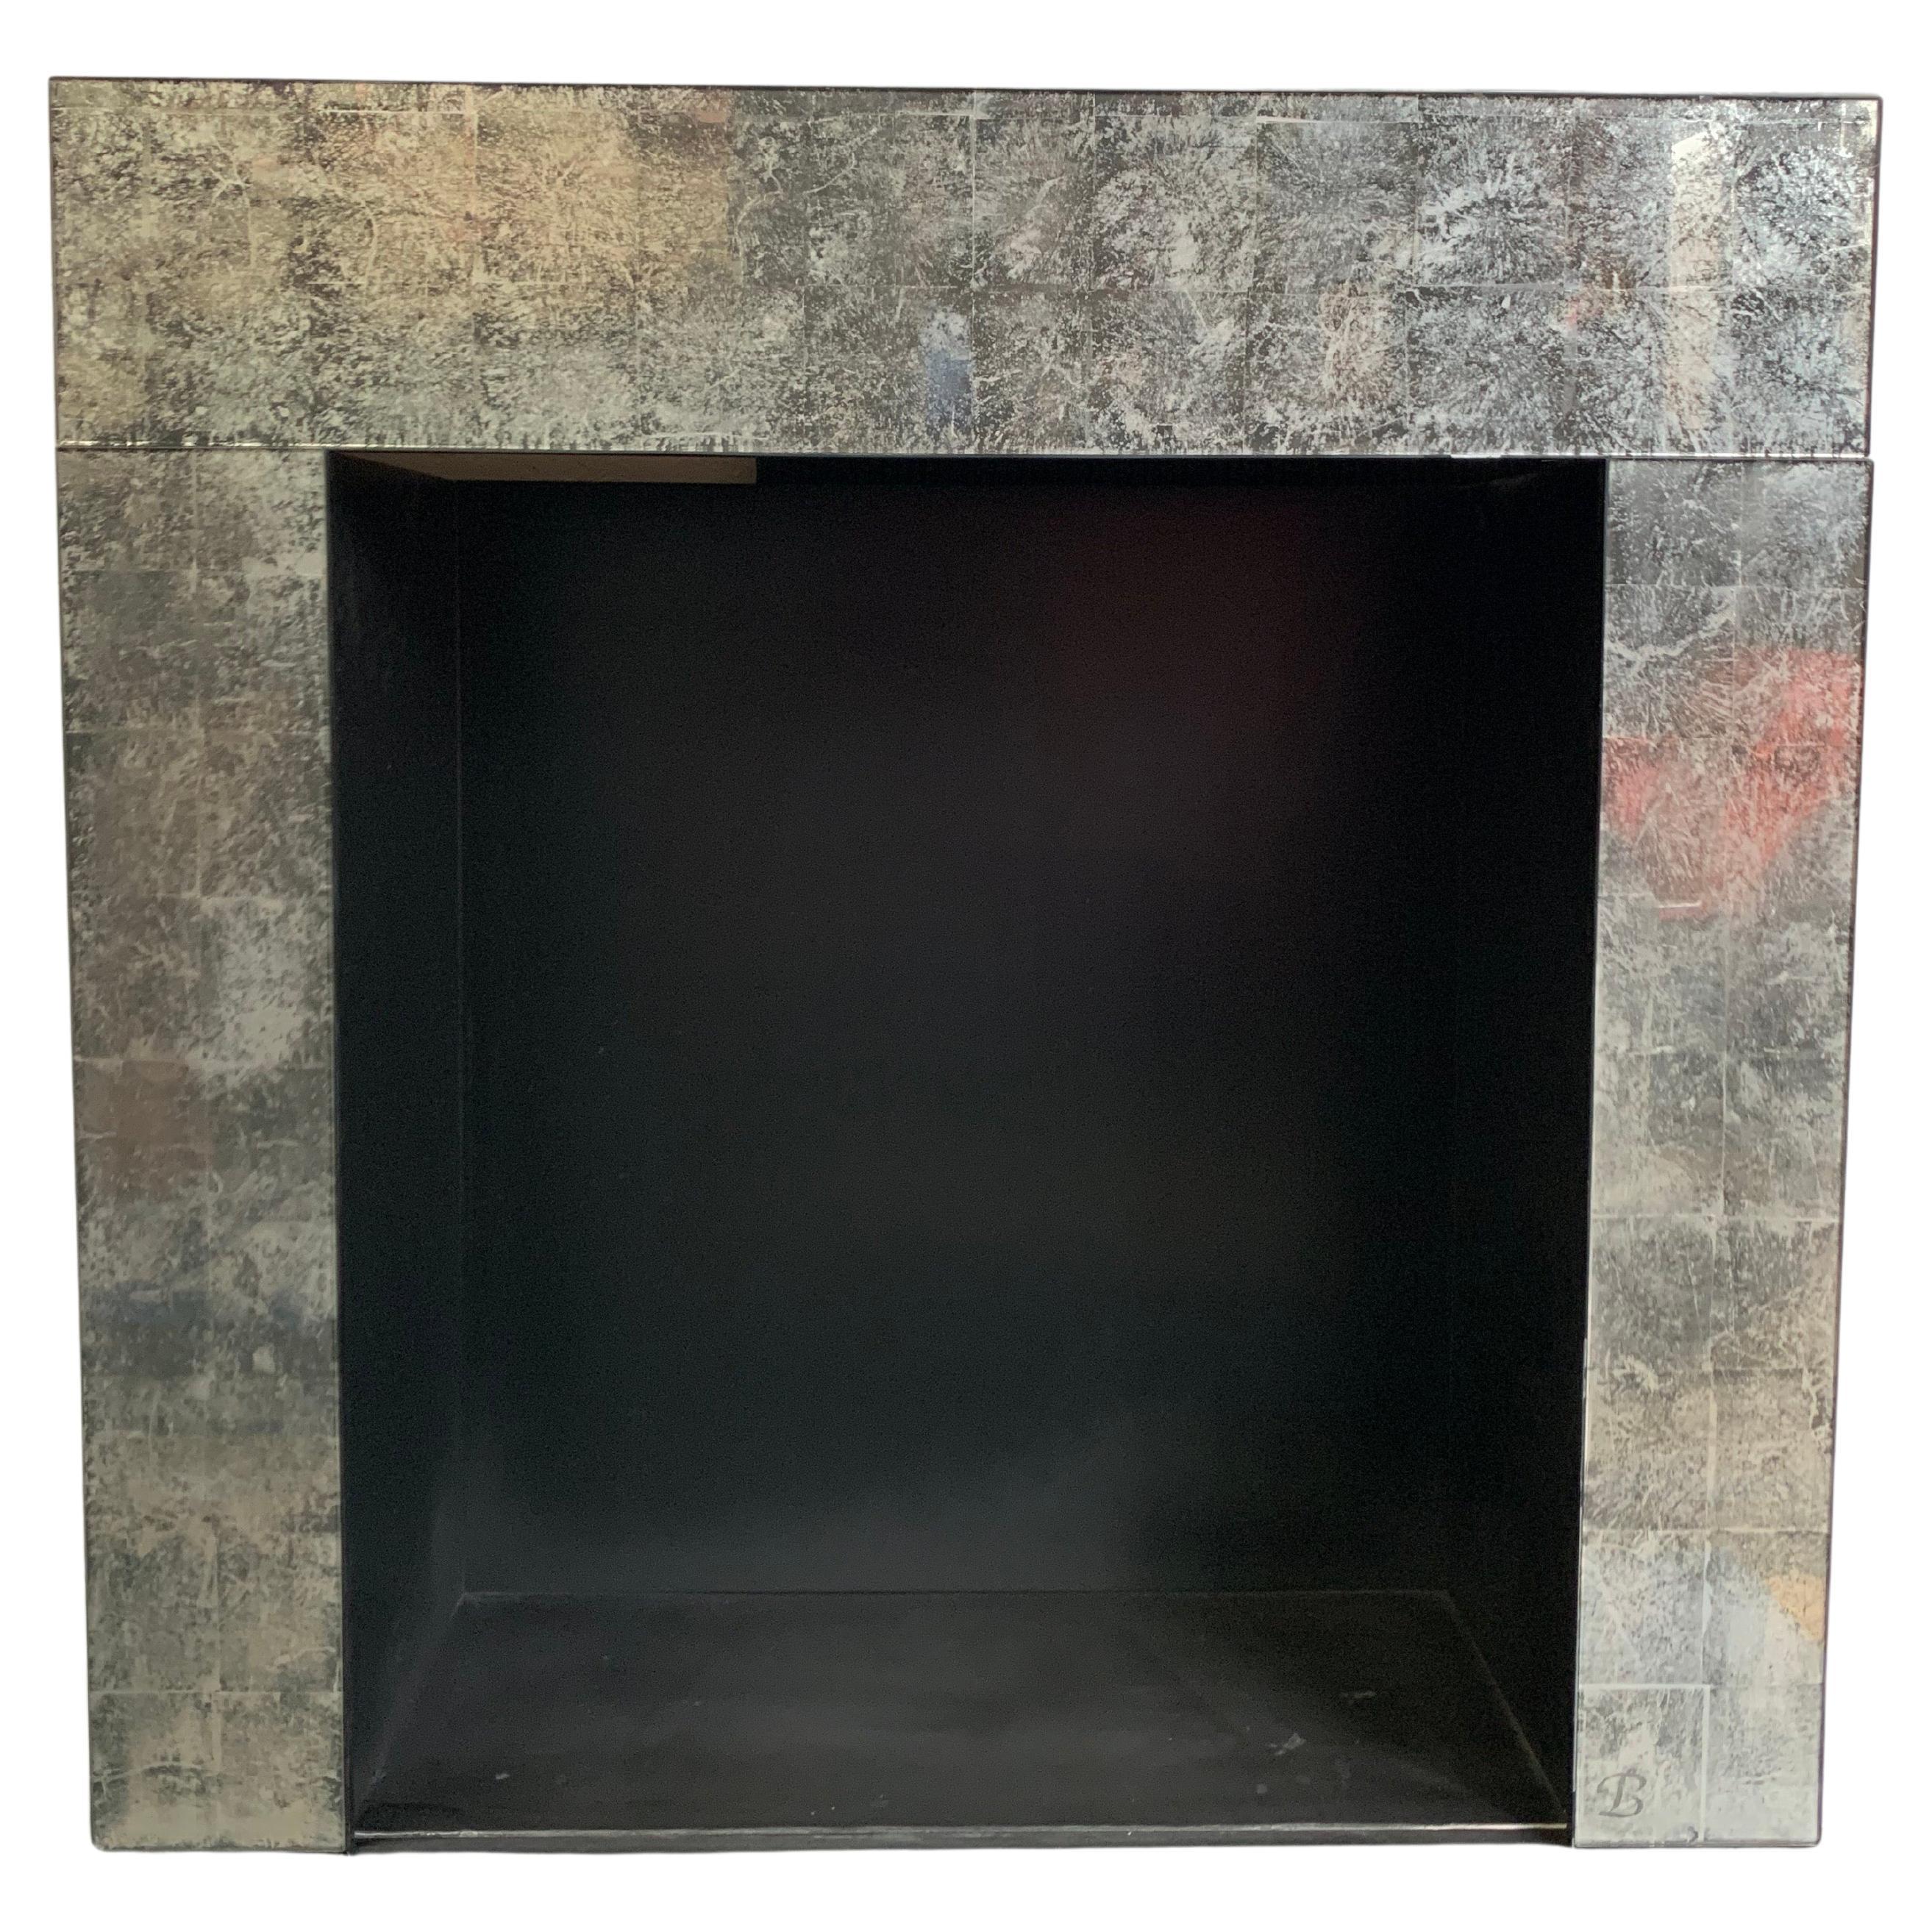 21st Century Antique Glass & Steel Fireplace Insert For Sale